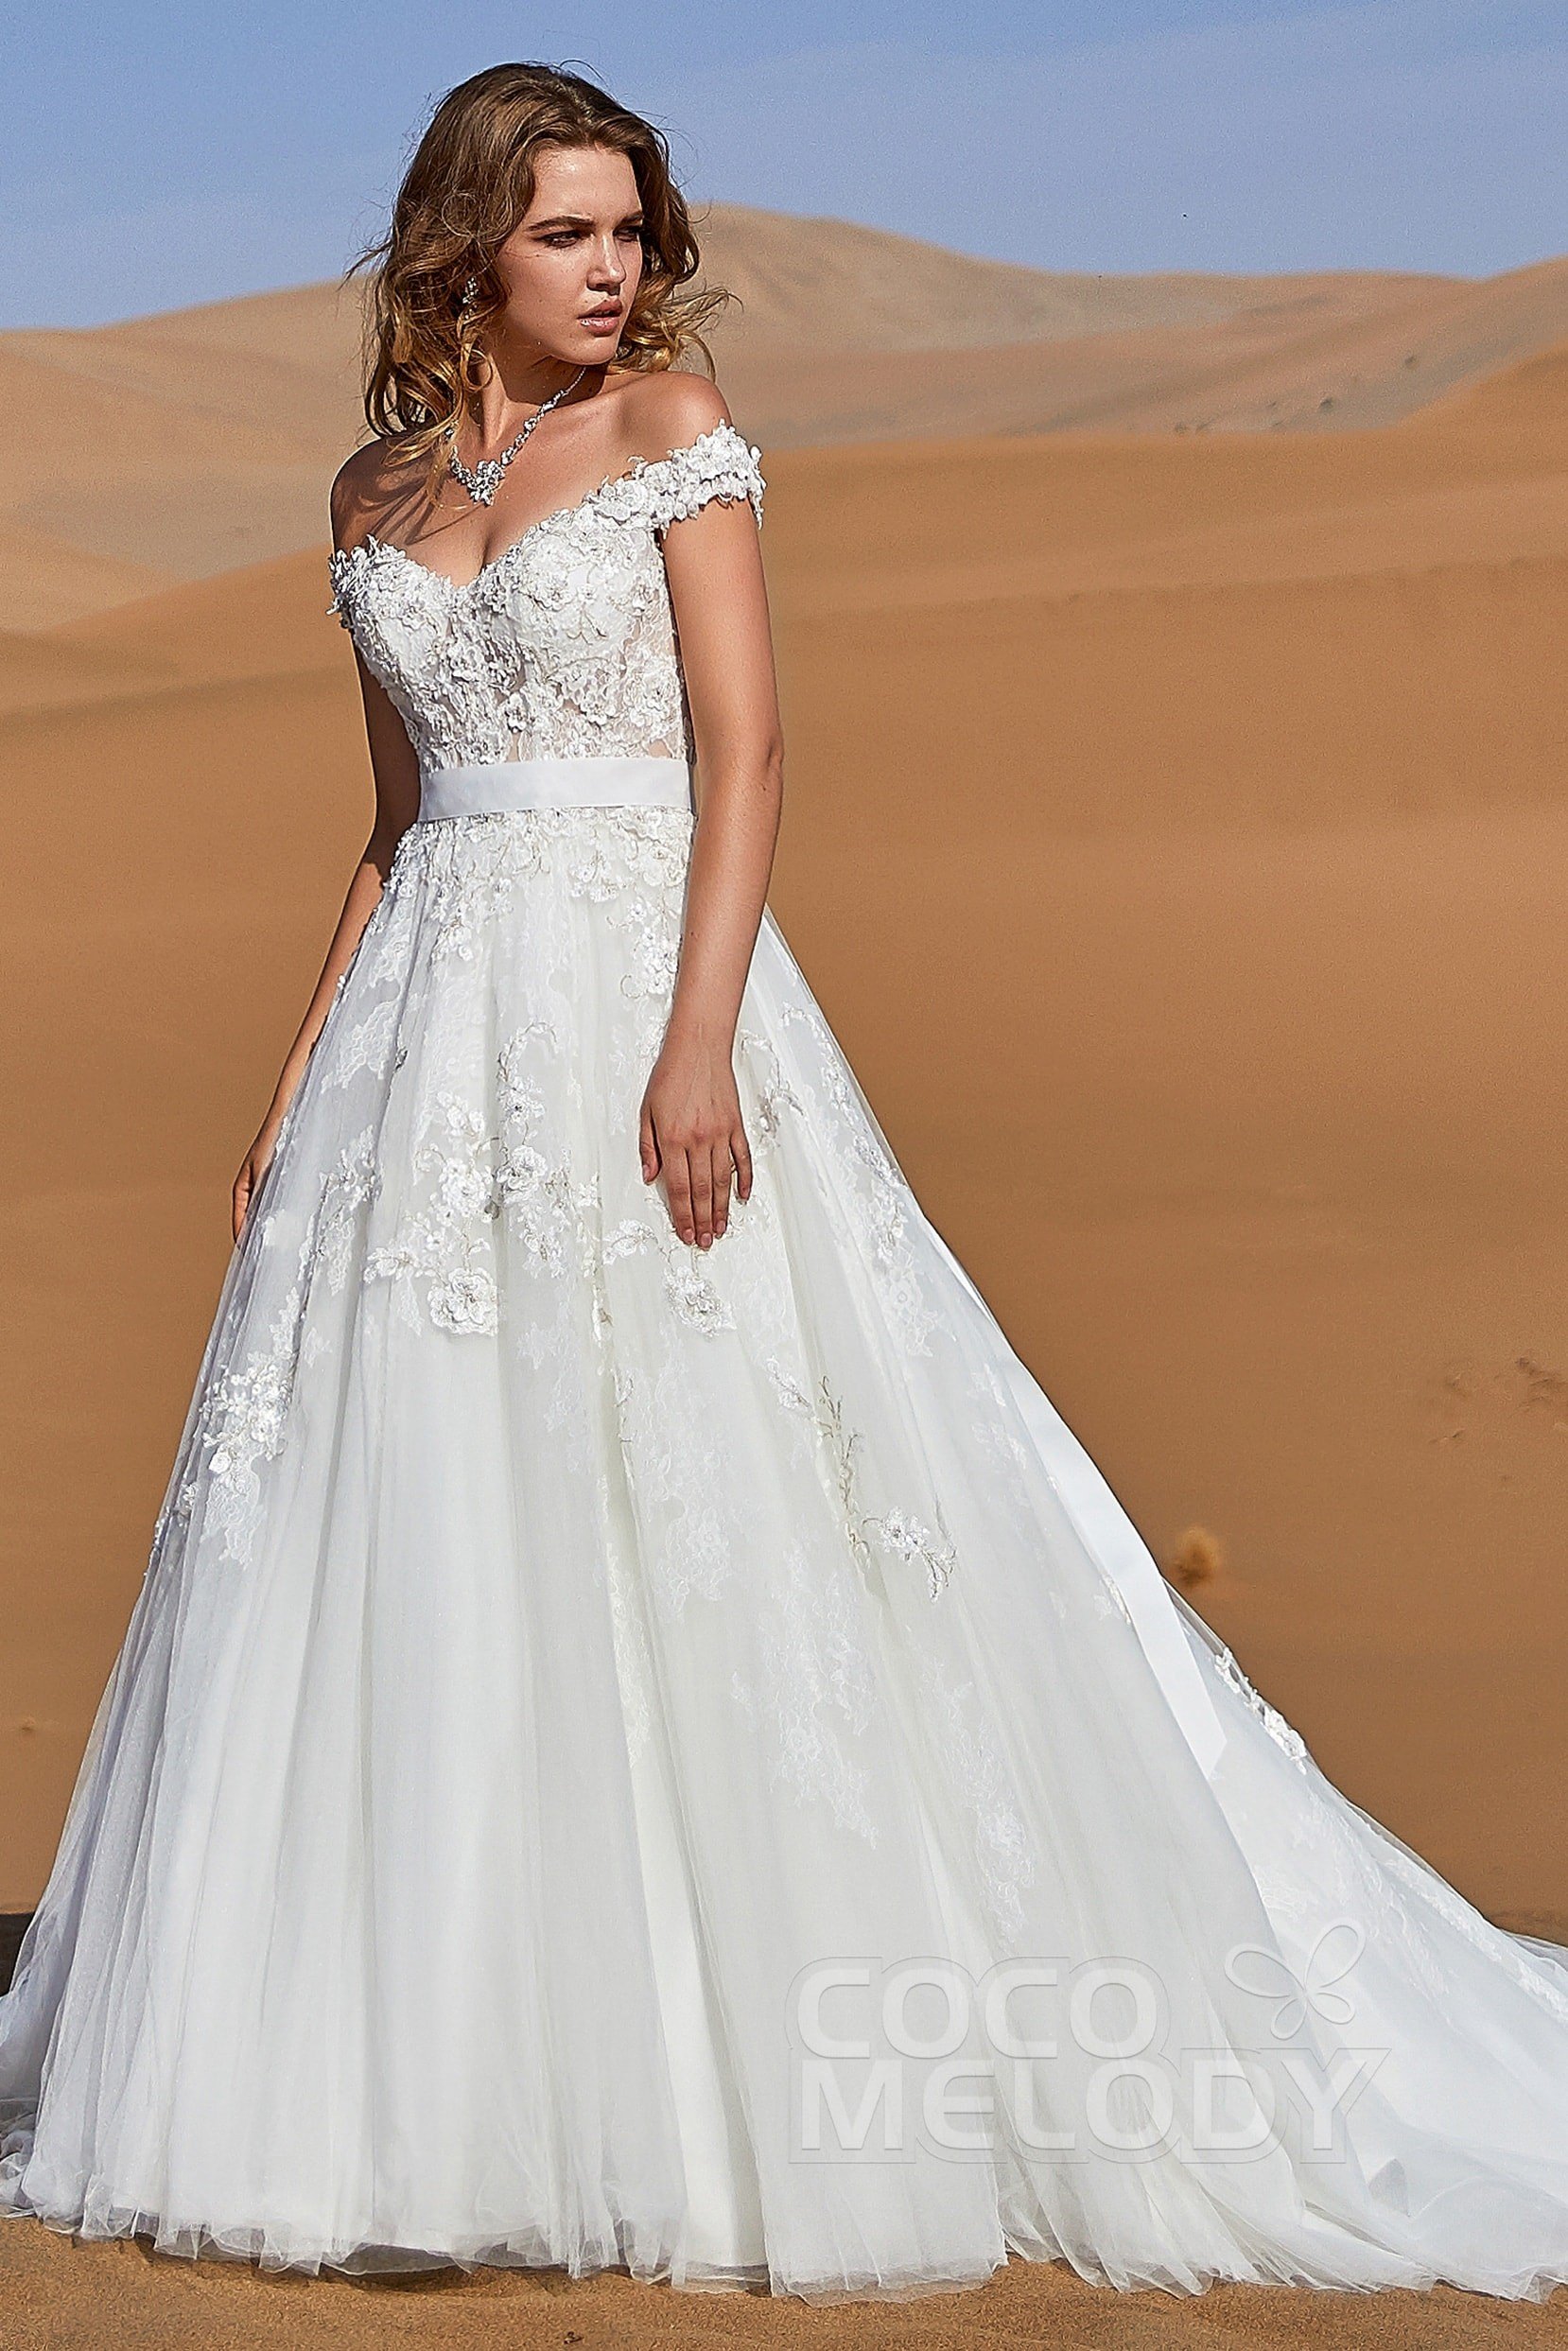 Requirements To Be A Wedding Dress Designer